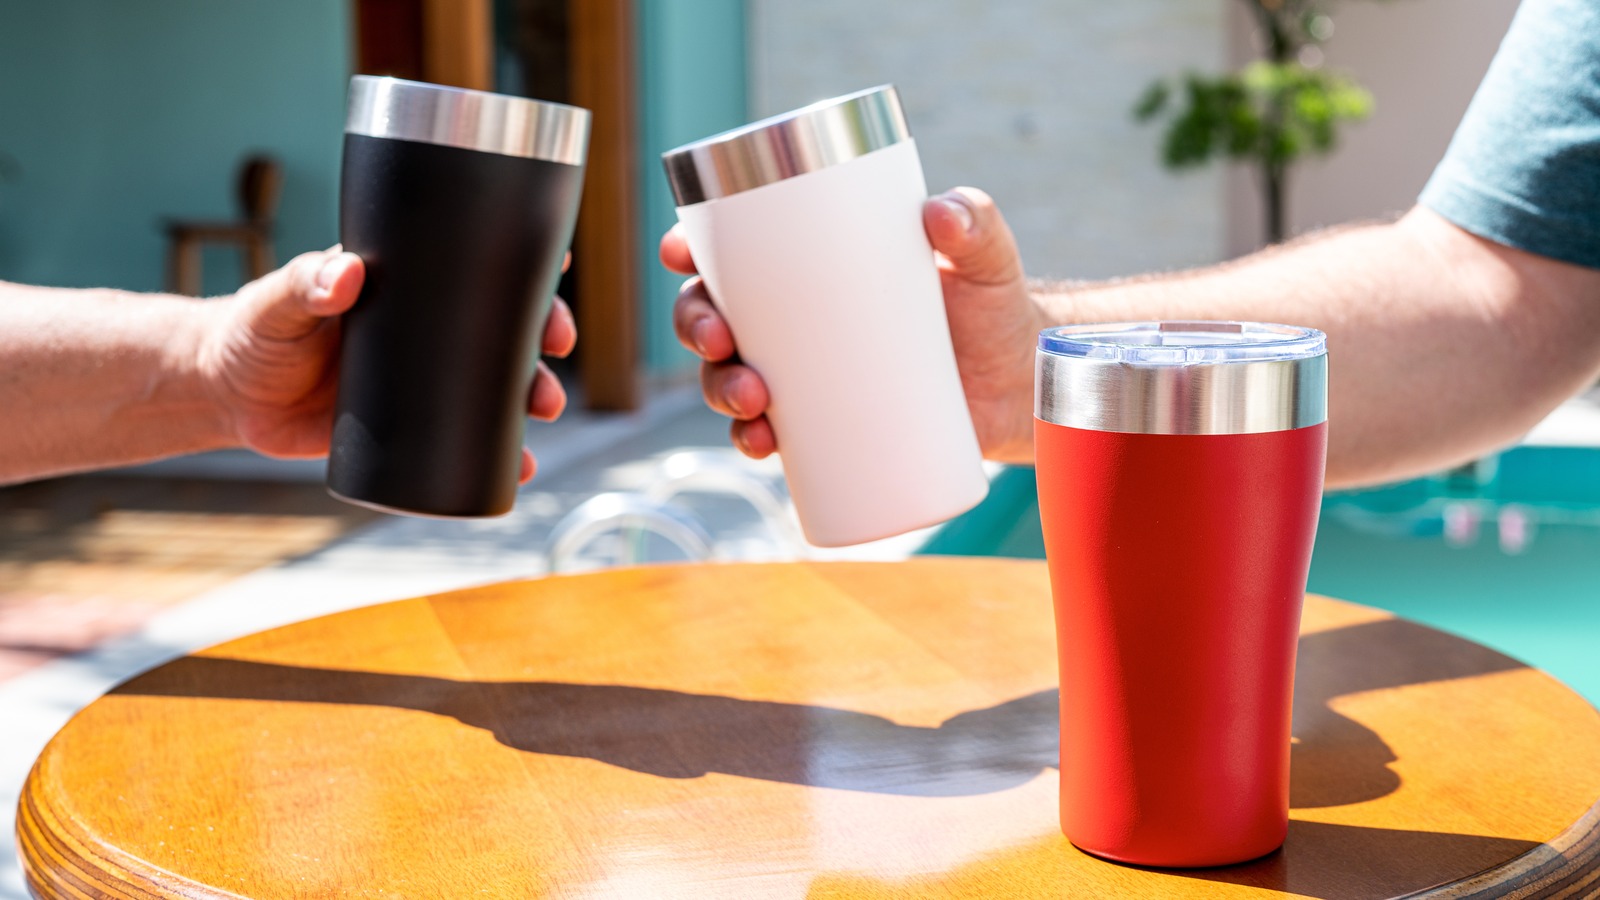 How to Clean a Travel Mug and Get Rid of That Stink – The Daily Meal